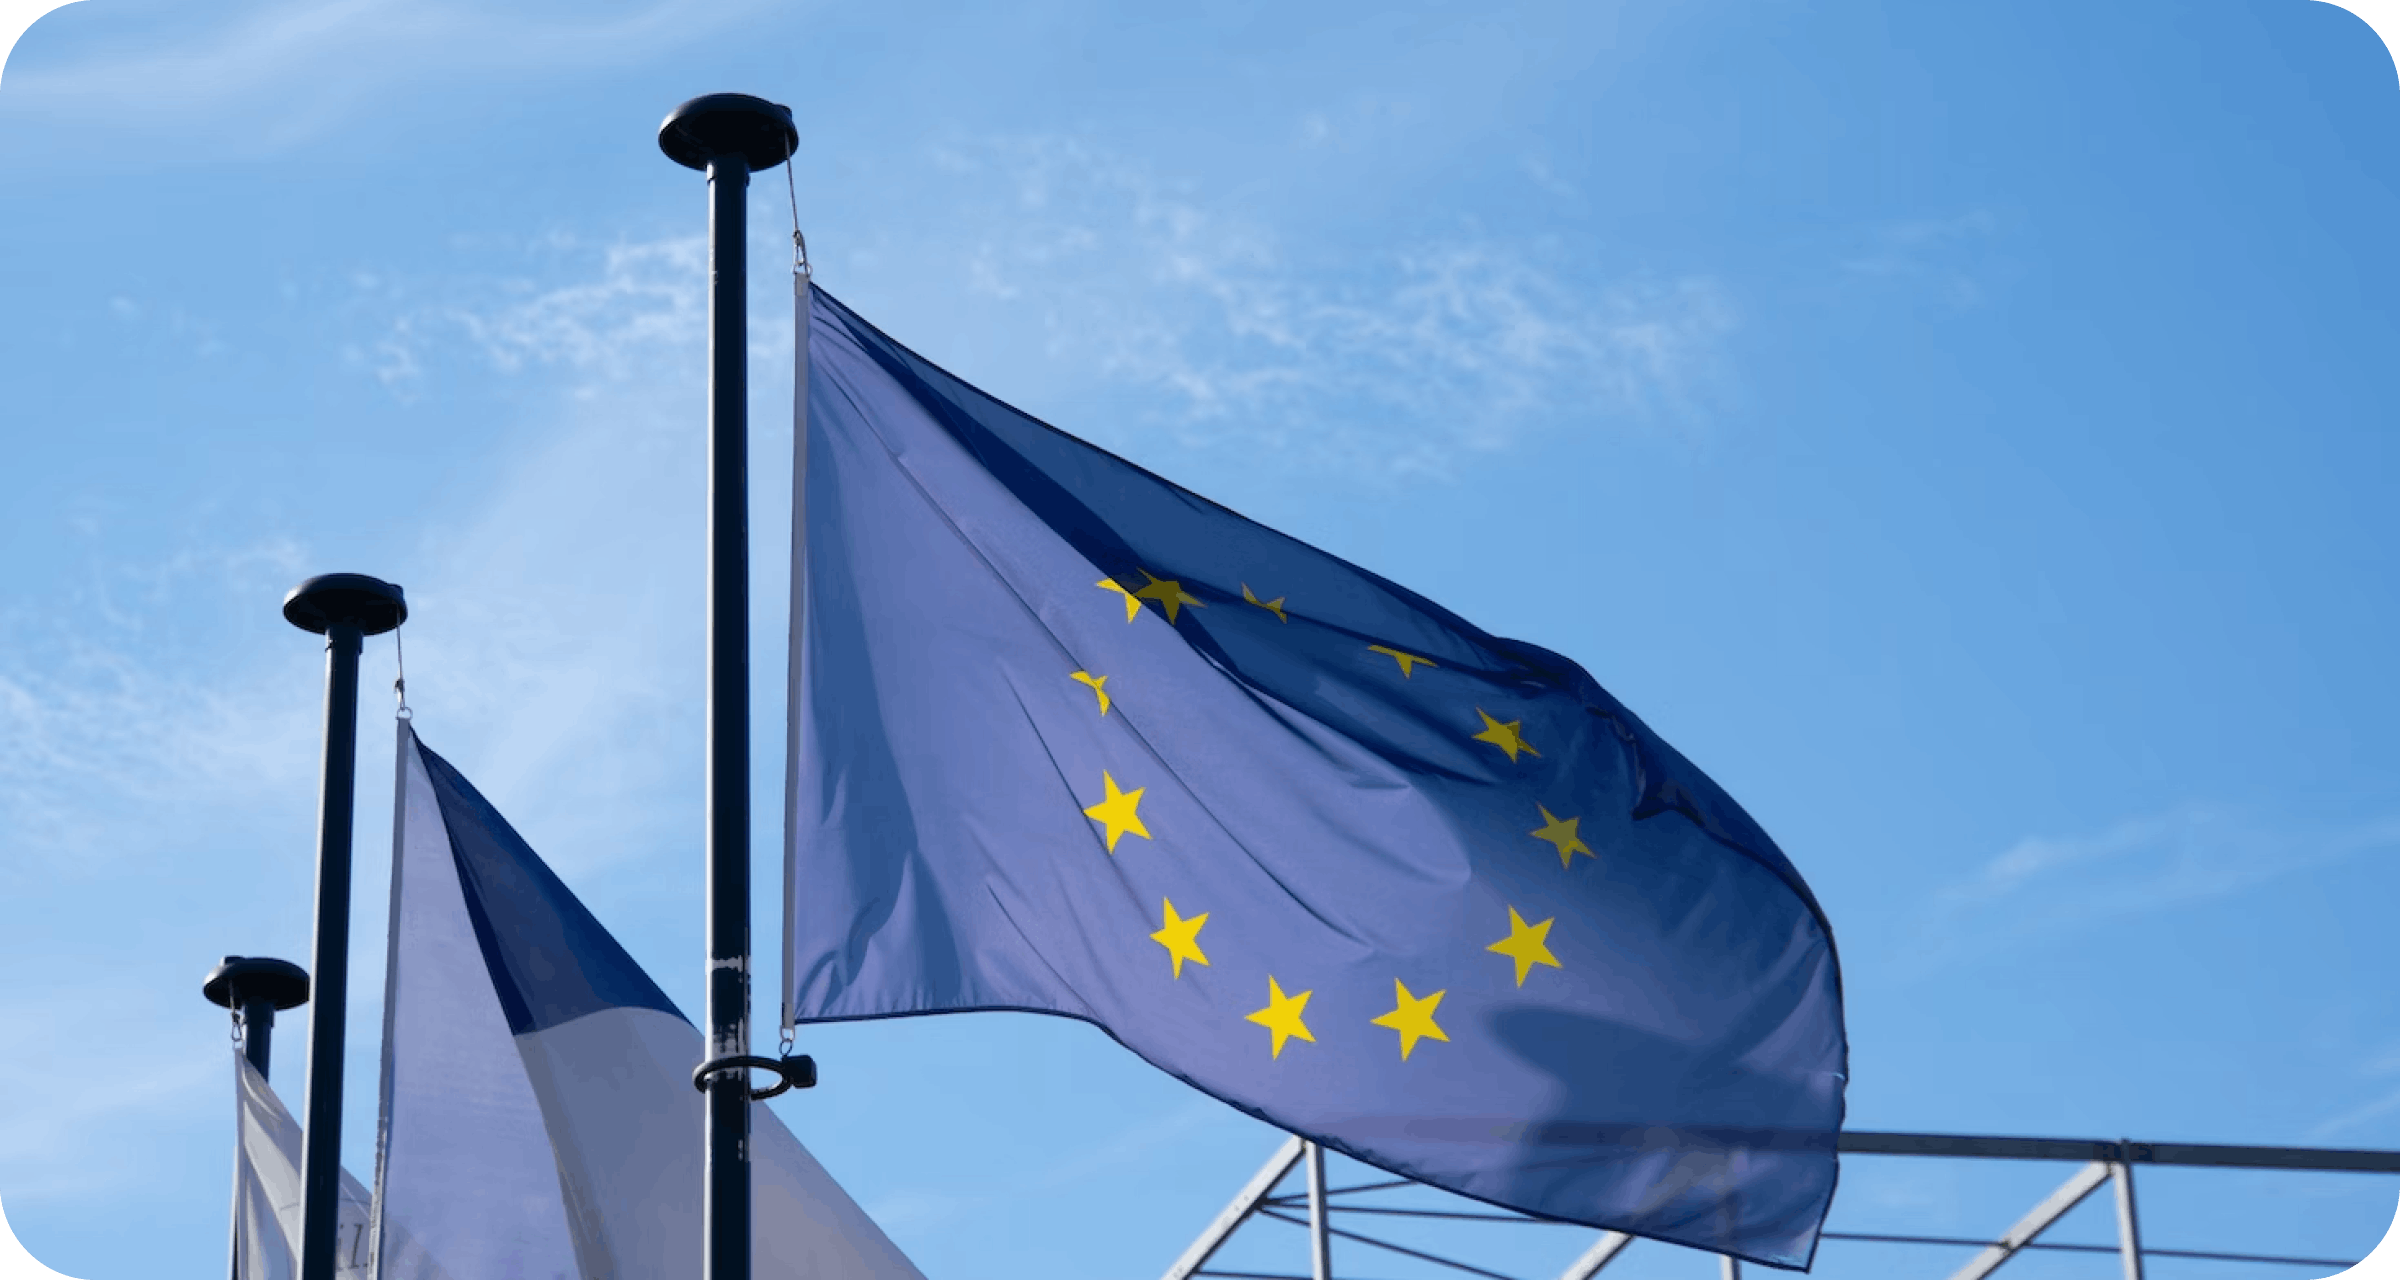 Photo of the EU flag with a background of blue sky